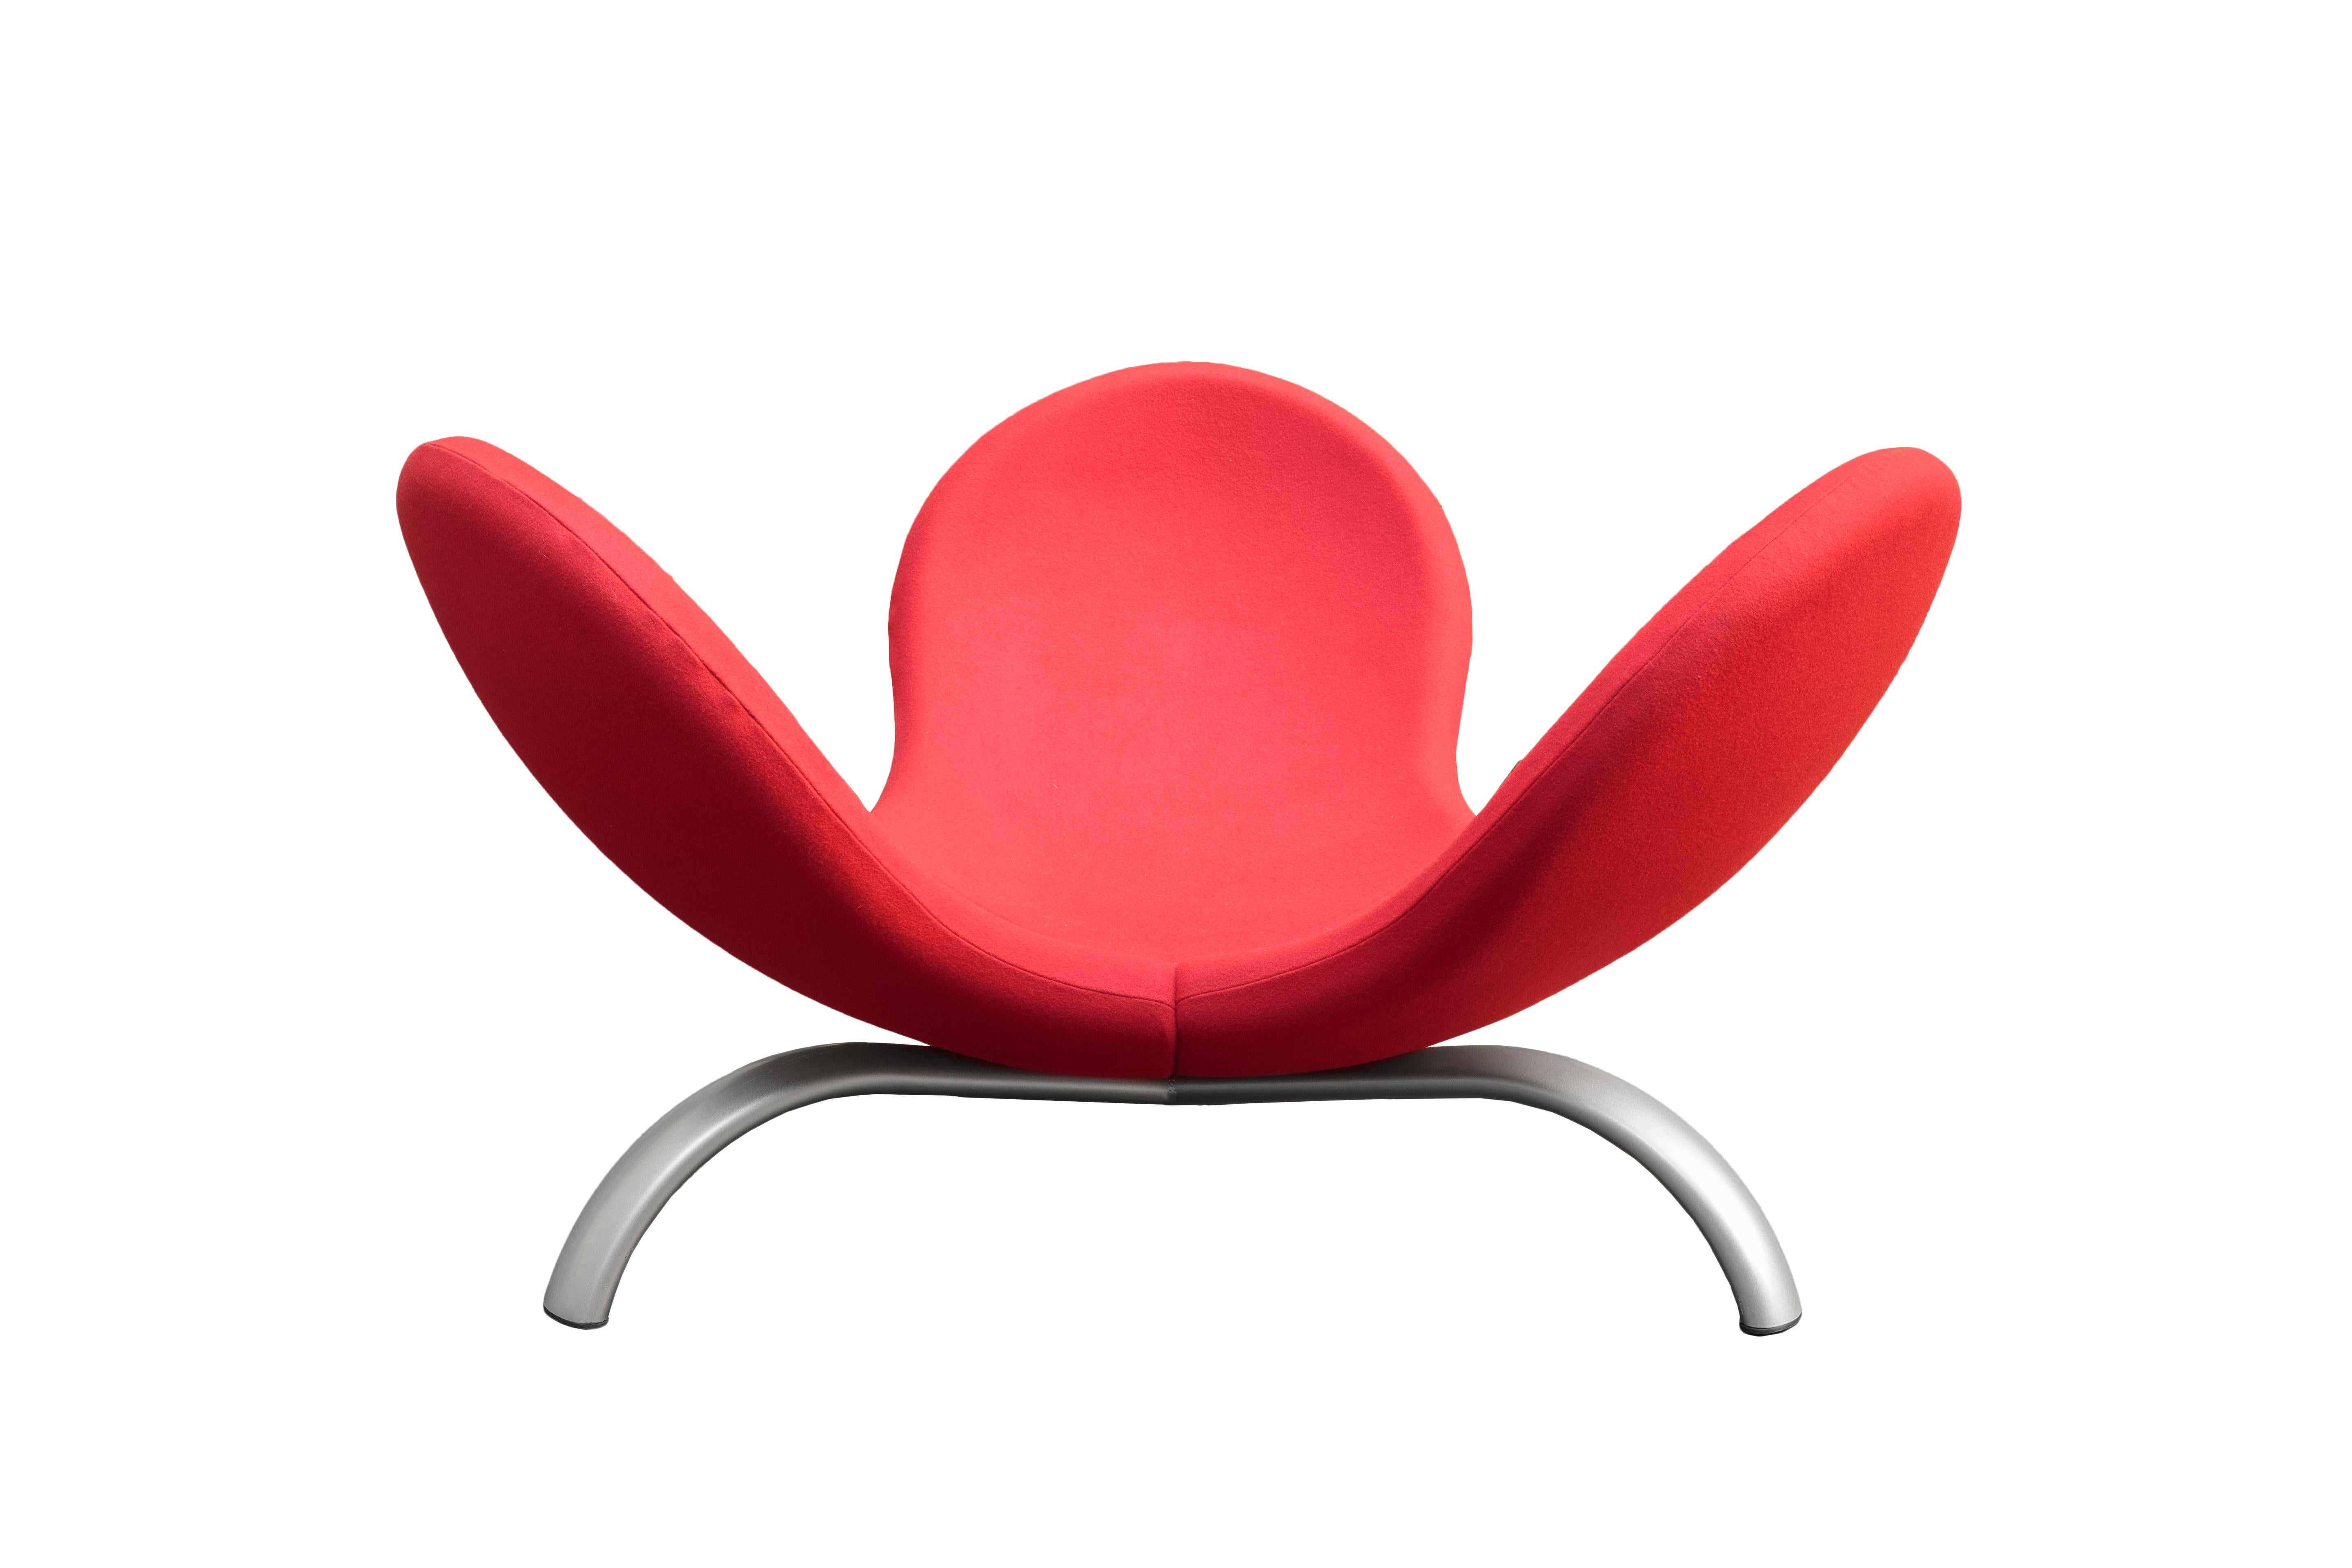 The Meditation Pod armchair is made up of a shaped metal structure and padding in foamed polyurethane upholstered with a brilliant red fabric.

The Meditation Pod, designed by Steven Blaess and produced by Edra during the first 2000s is an